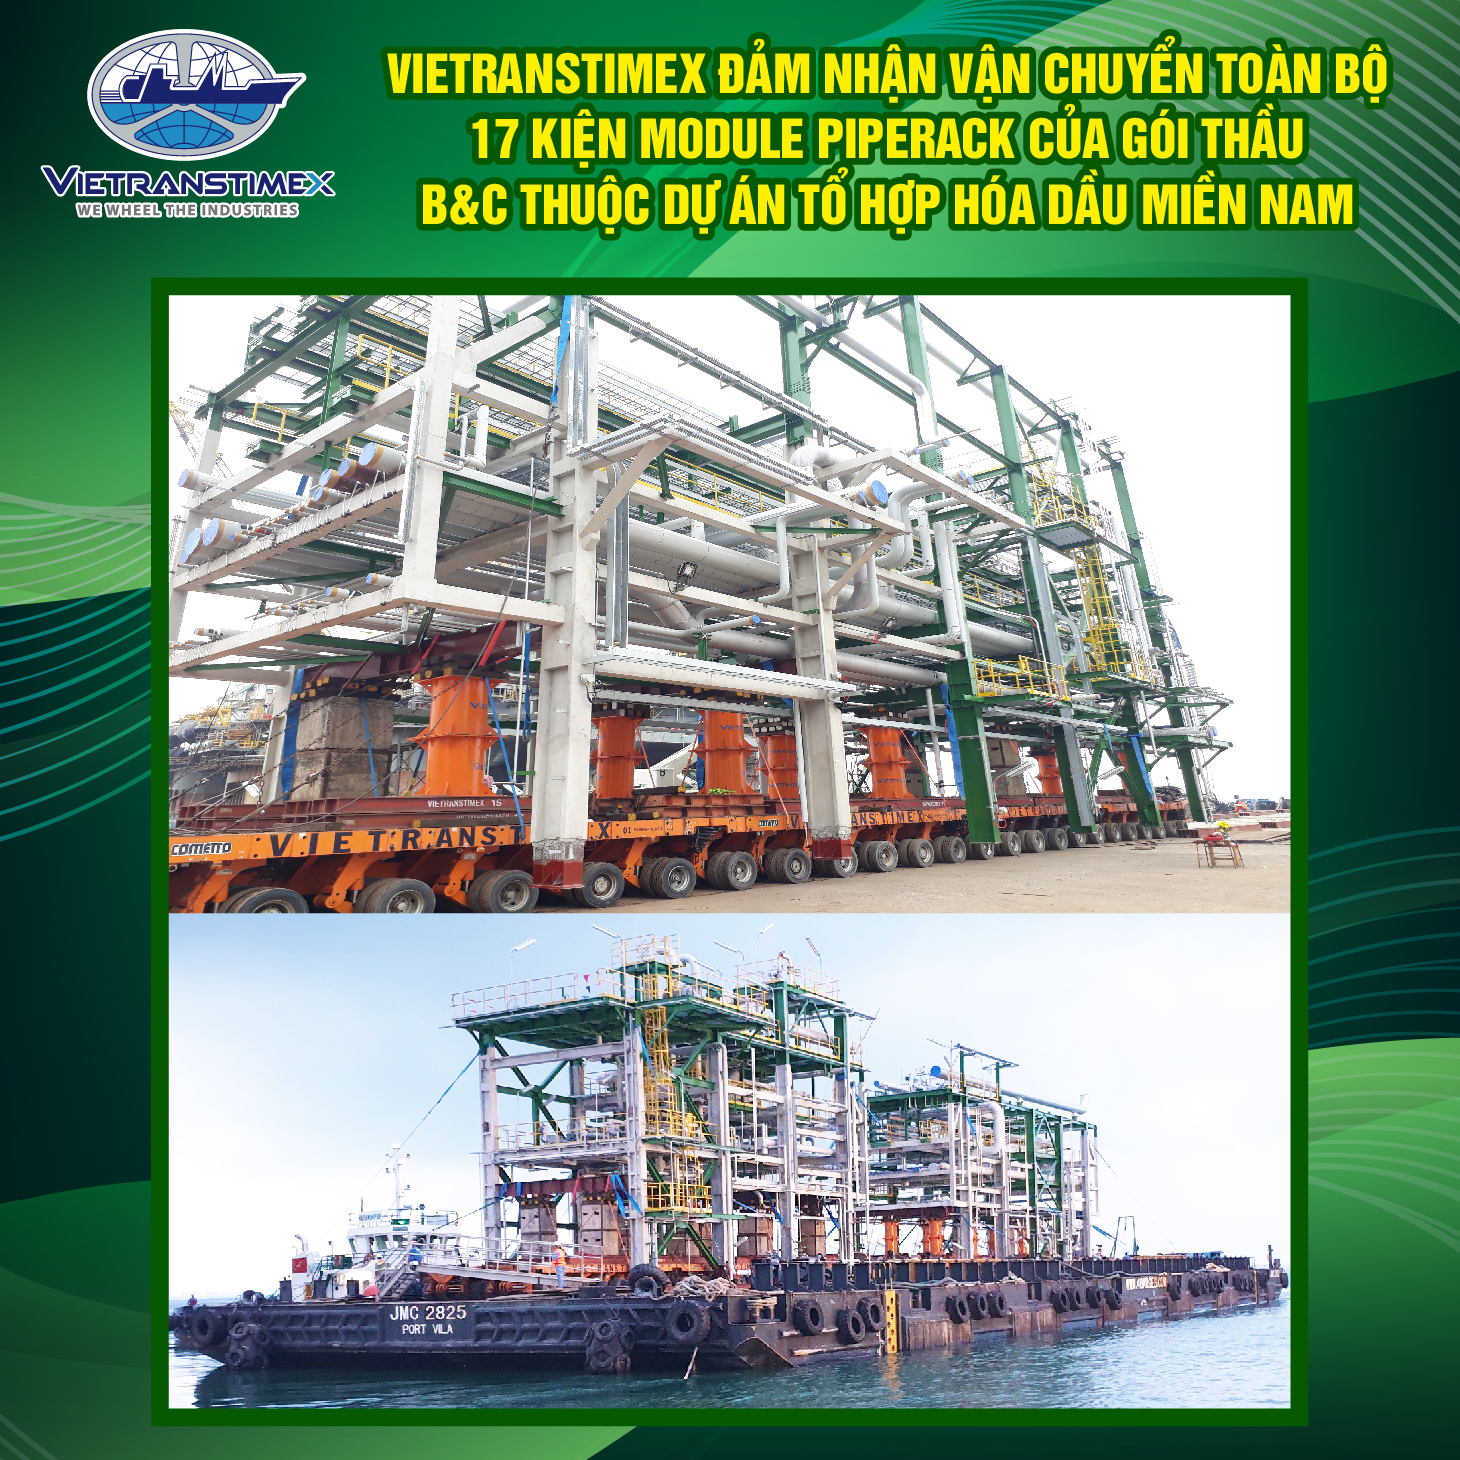 Vietranstimex Handles To Transport 17 Piperack Modules Of B&C Package Under The Southern Petrochemical Complex Project